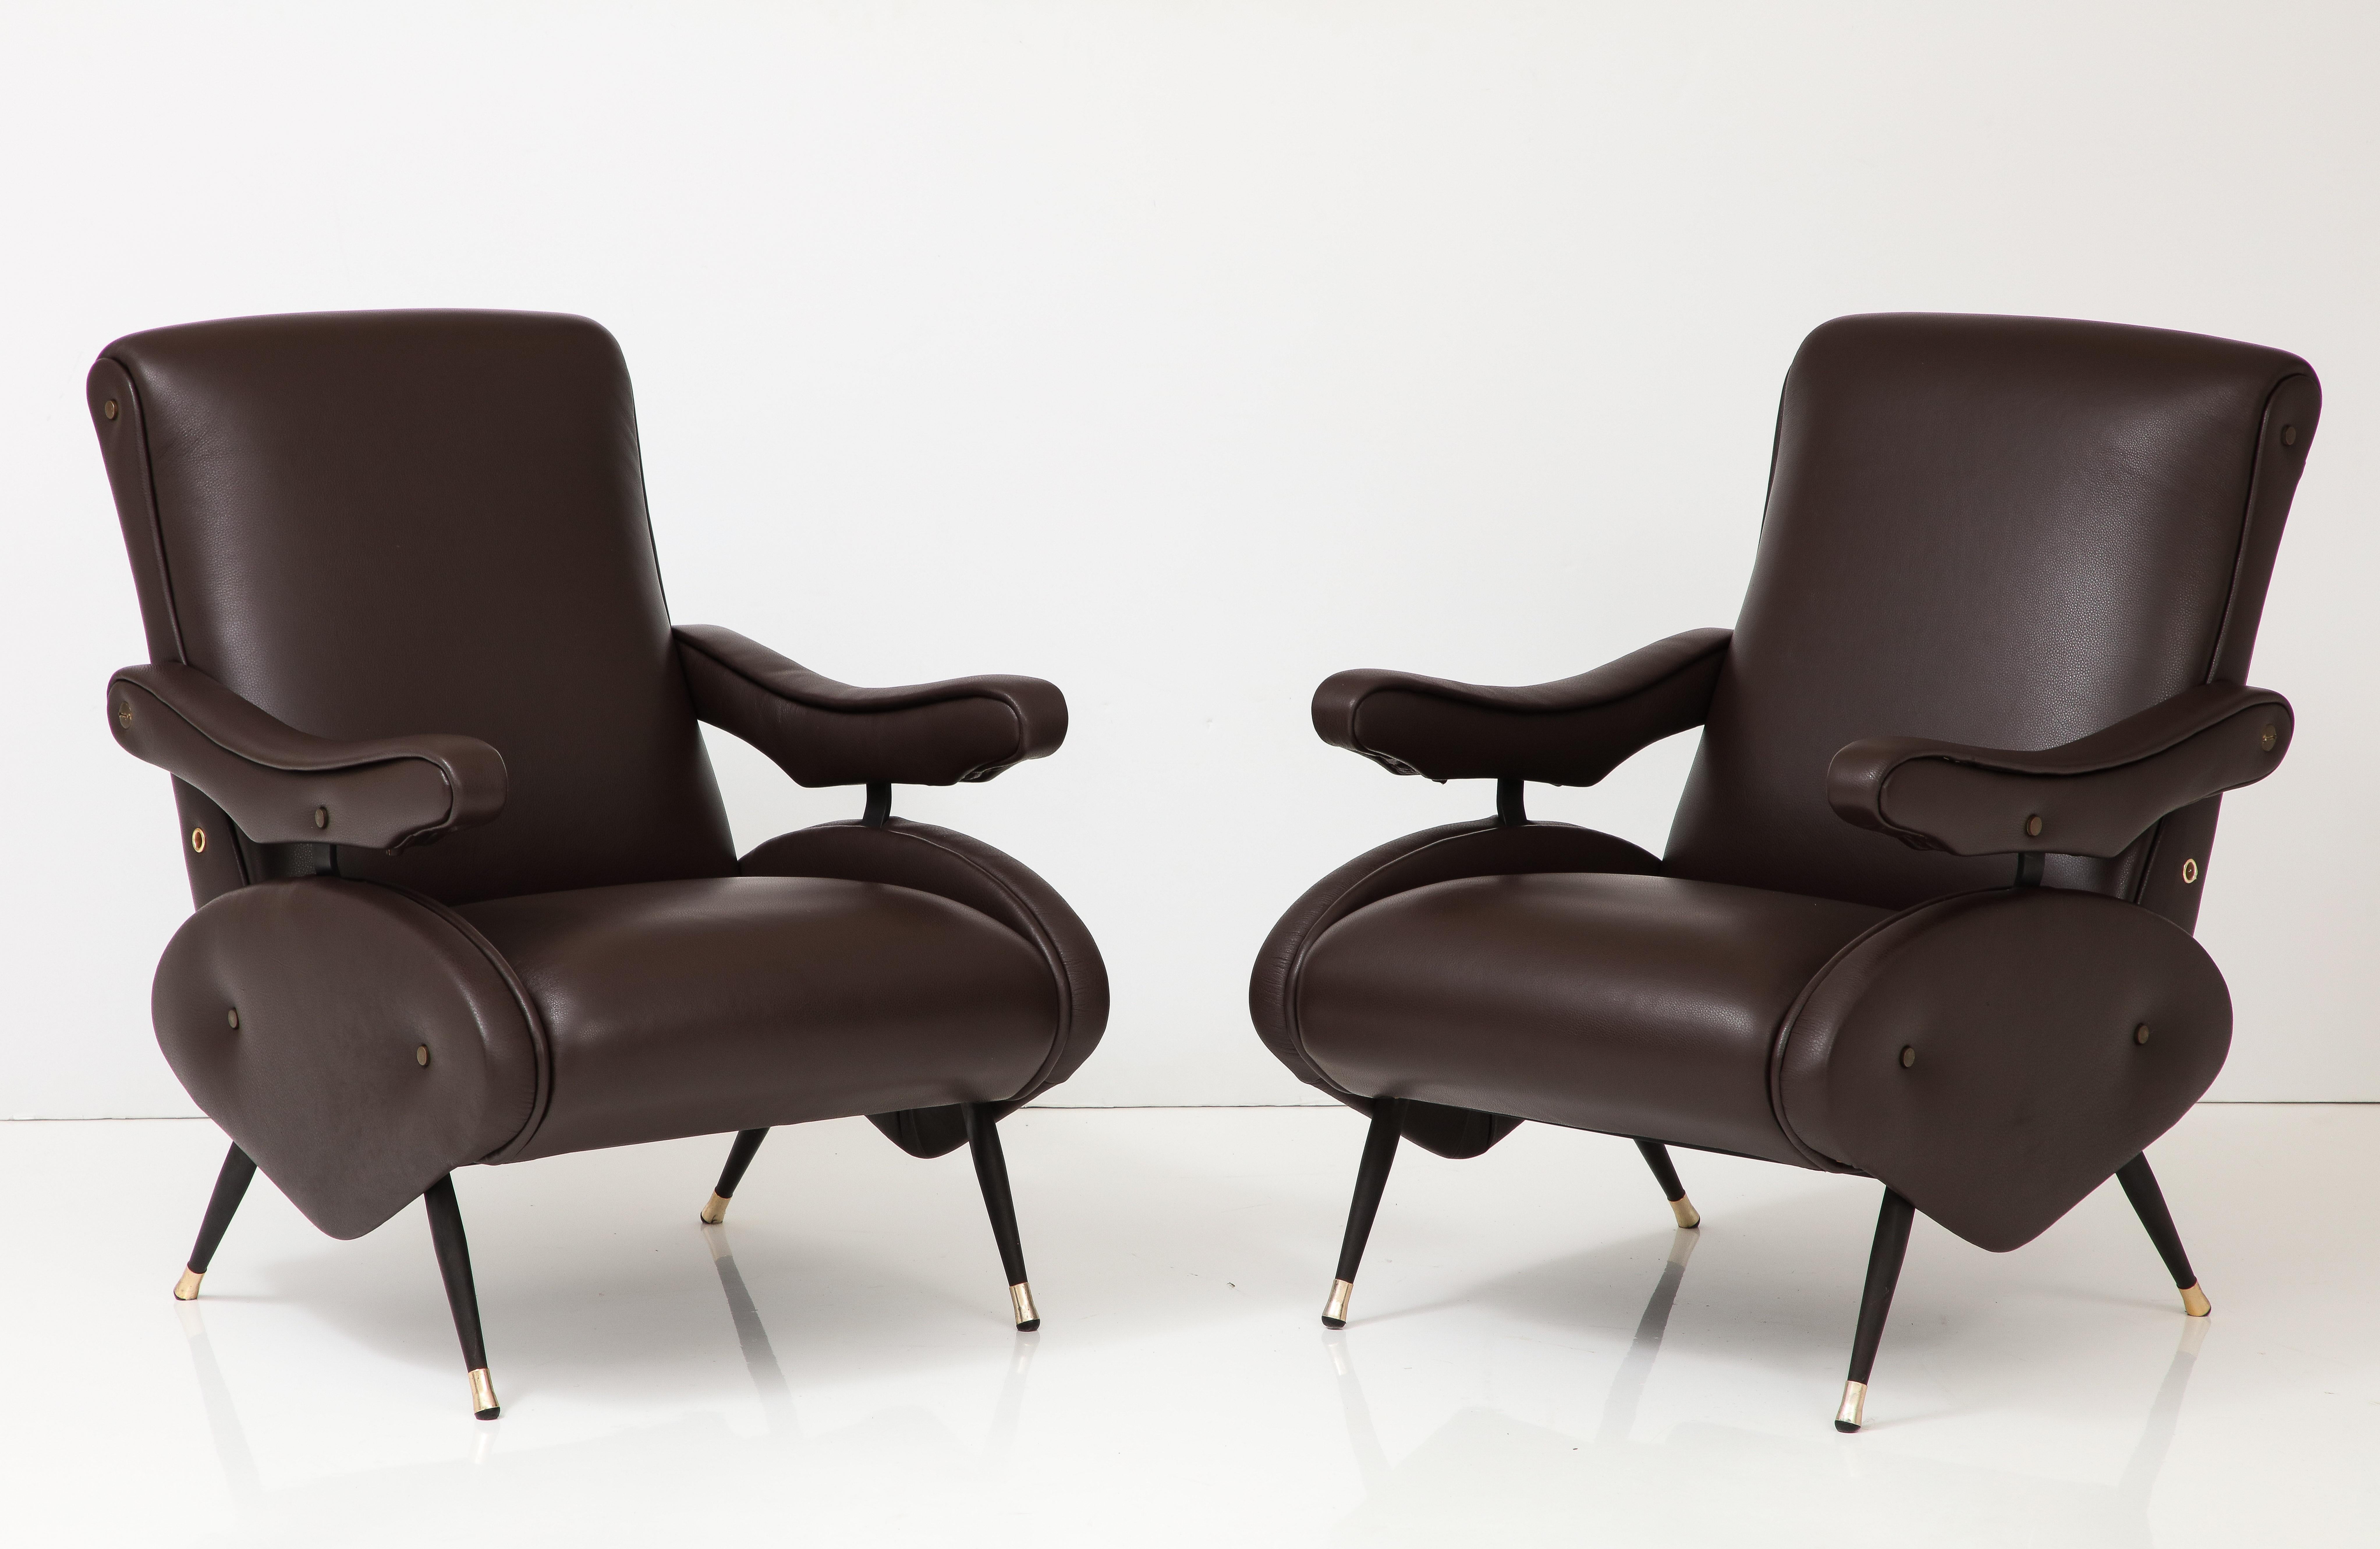 Nello Pini for Novarredo, Pair of Reclining Leather Lounge Chairs, Italy 1959  For Sale 4